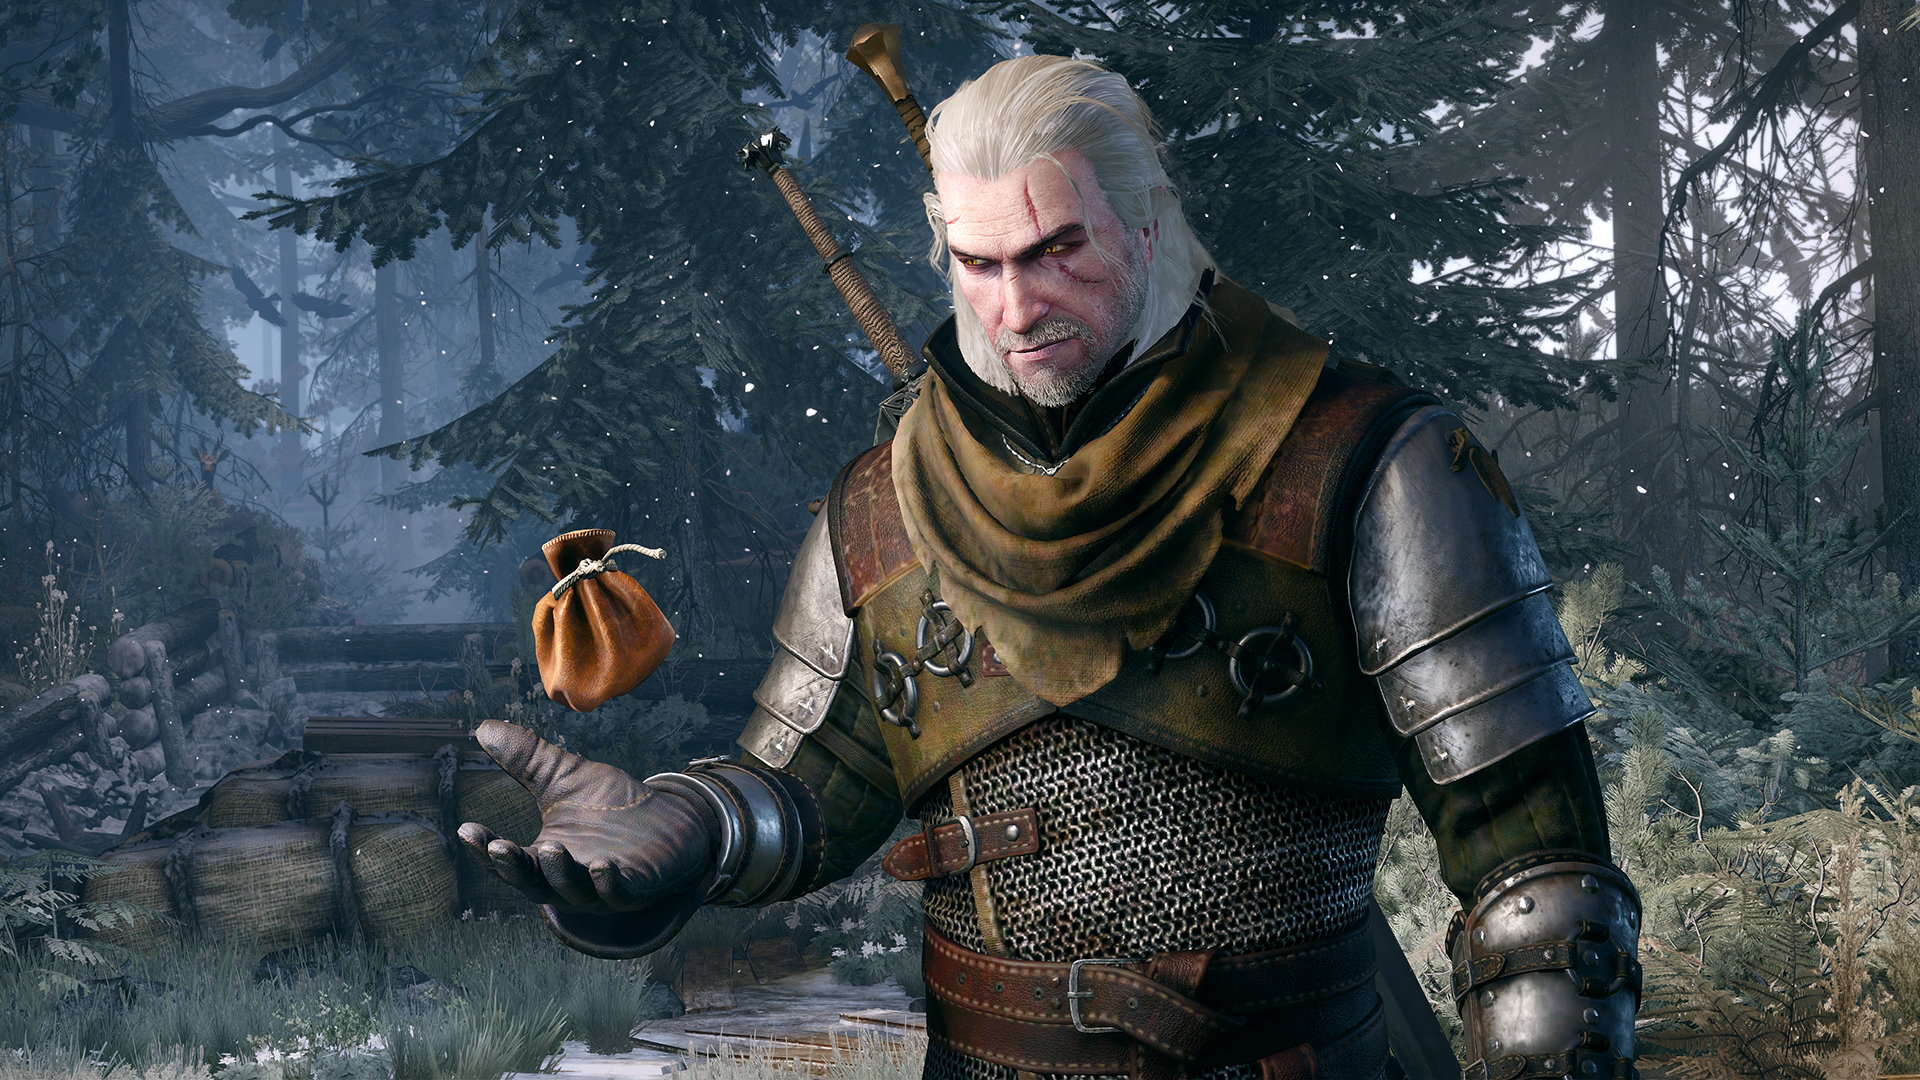 witcher 3 wild hunt serial key free for pc